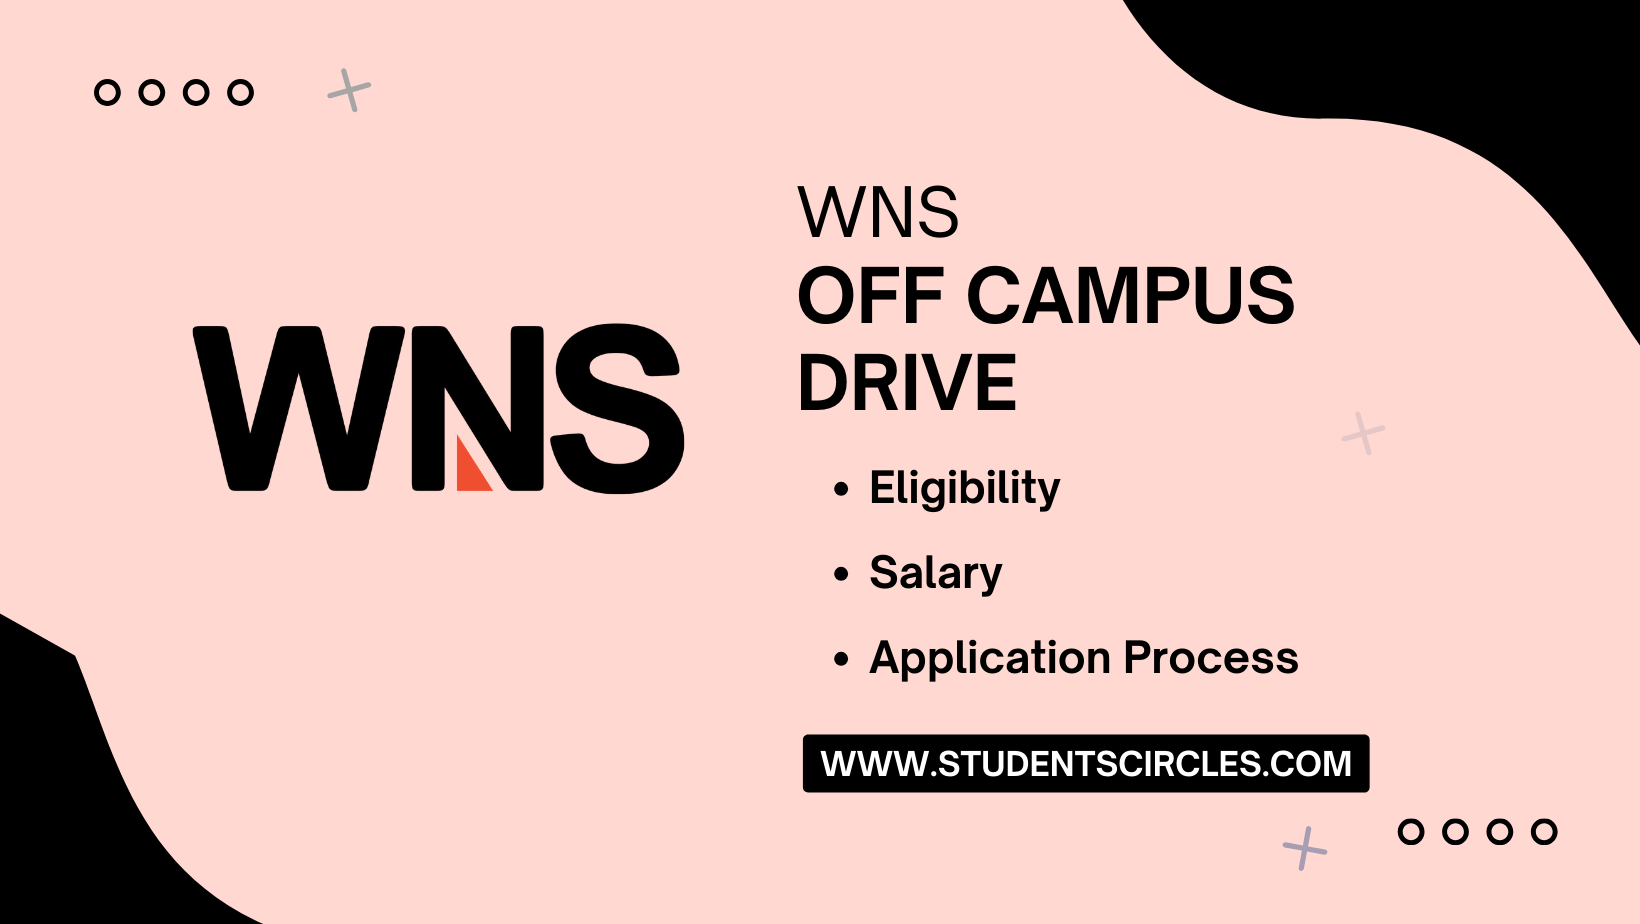 WNS Global Off Campus Drive